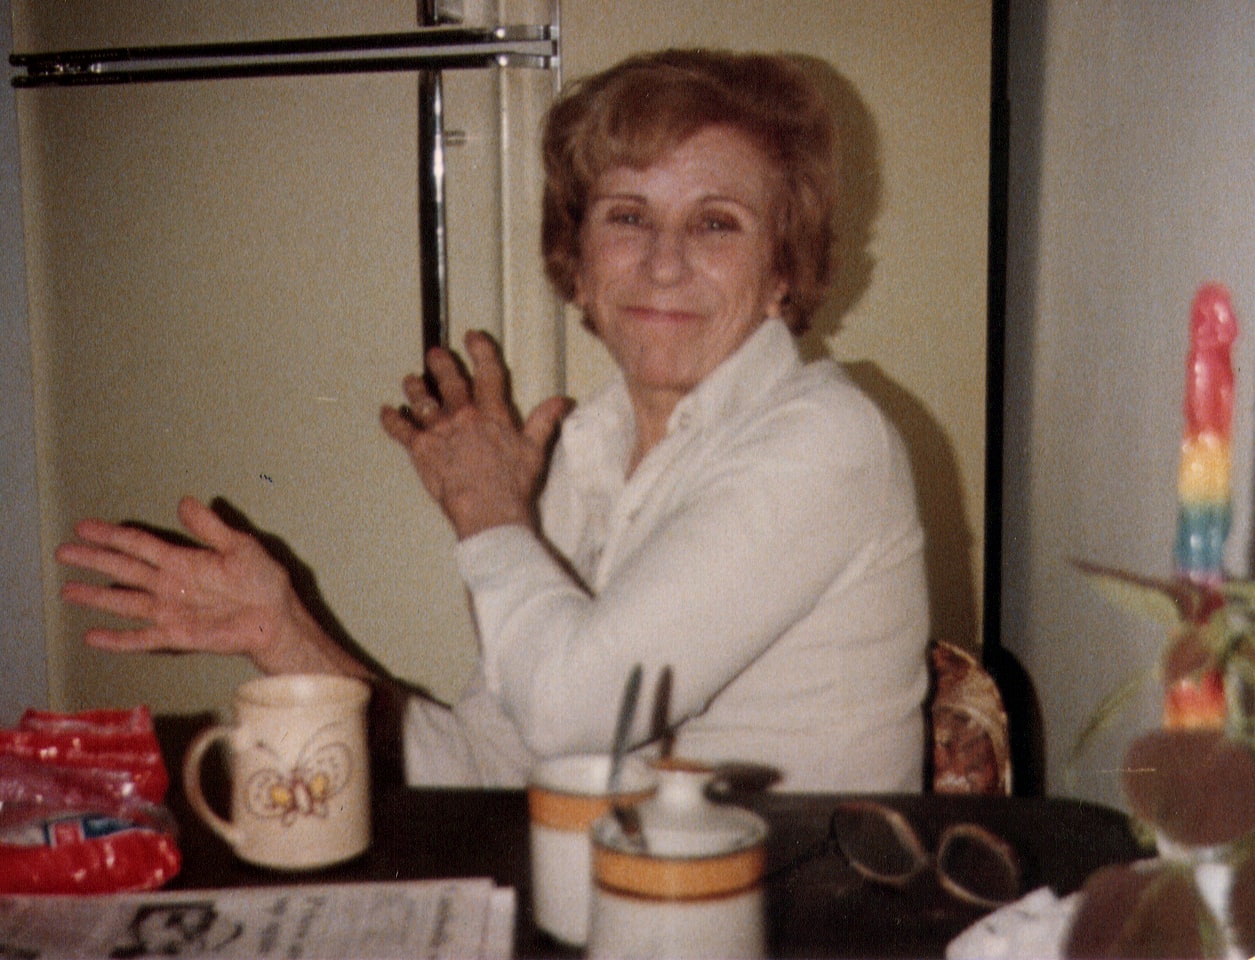 A woman sitting at the kitchen table slapping her hands together and smiling